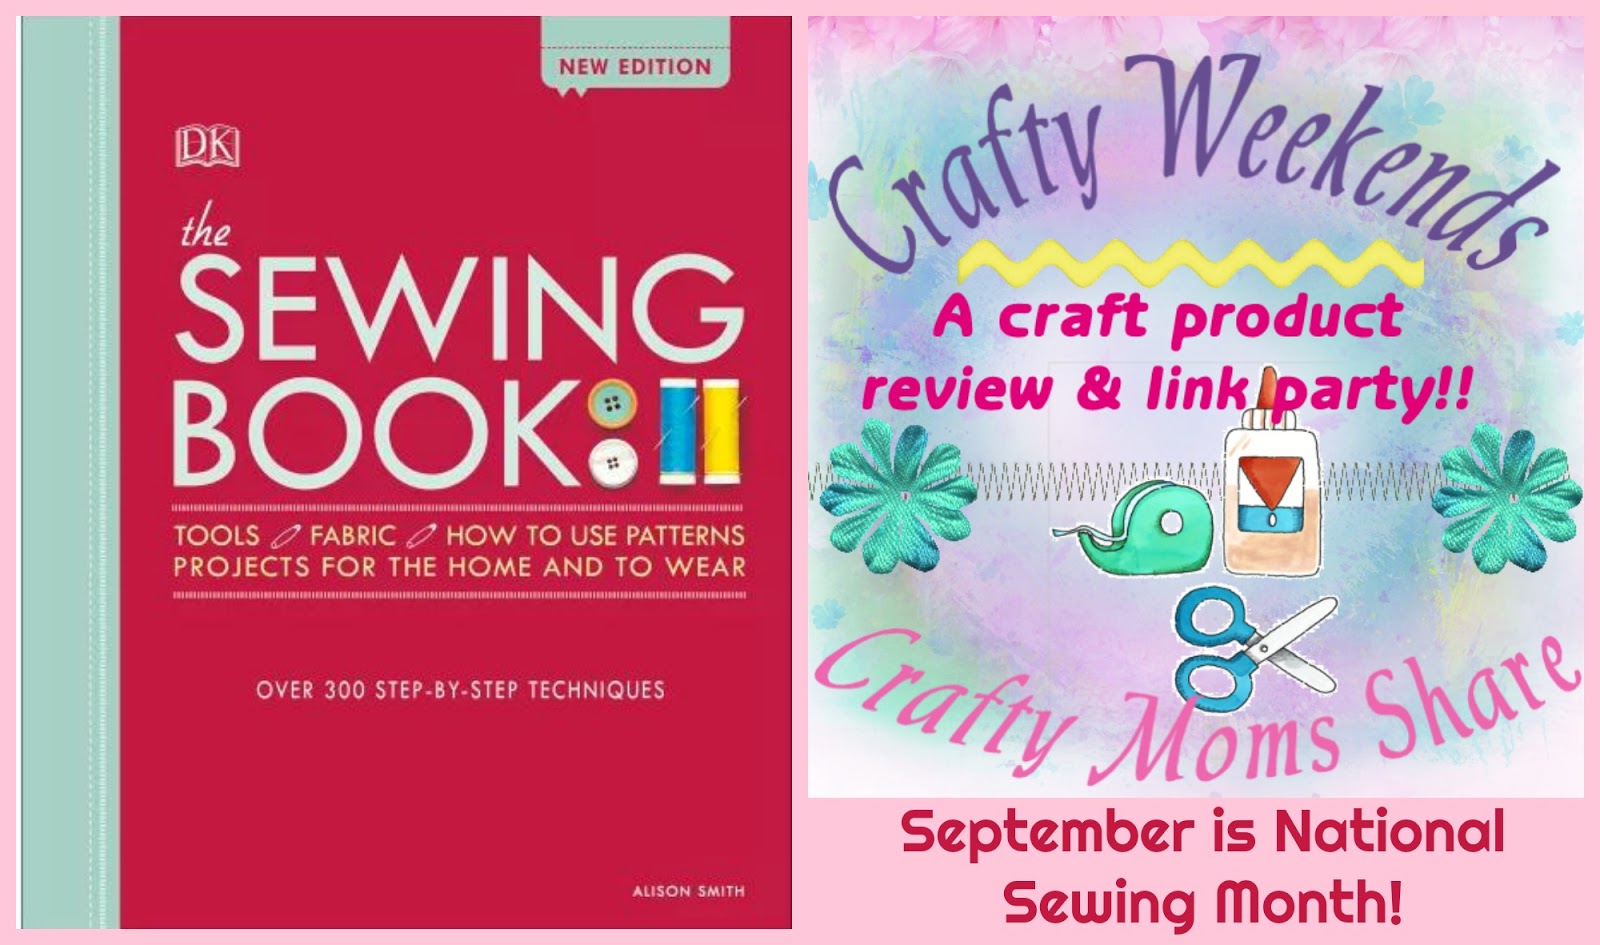 Crafty Moms Share: The Sewing Book -- a Crafty Weekends Review